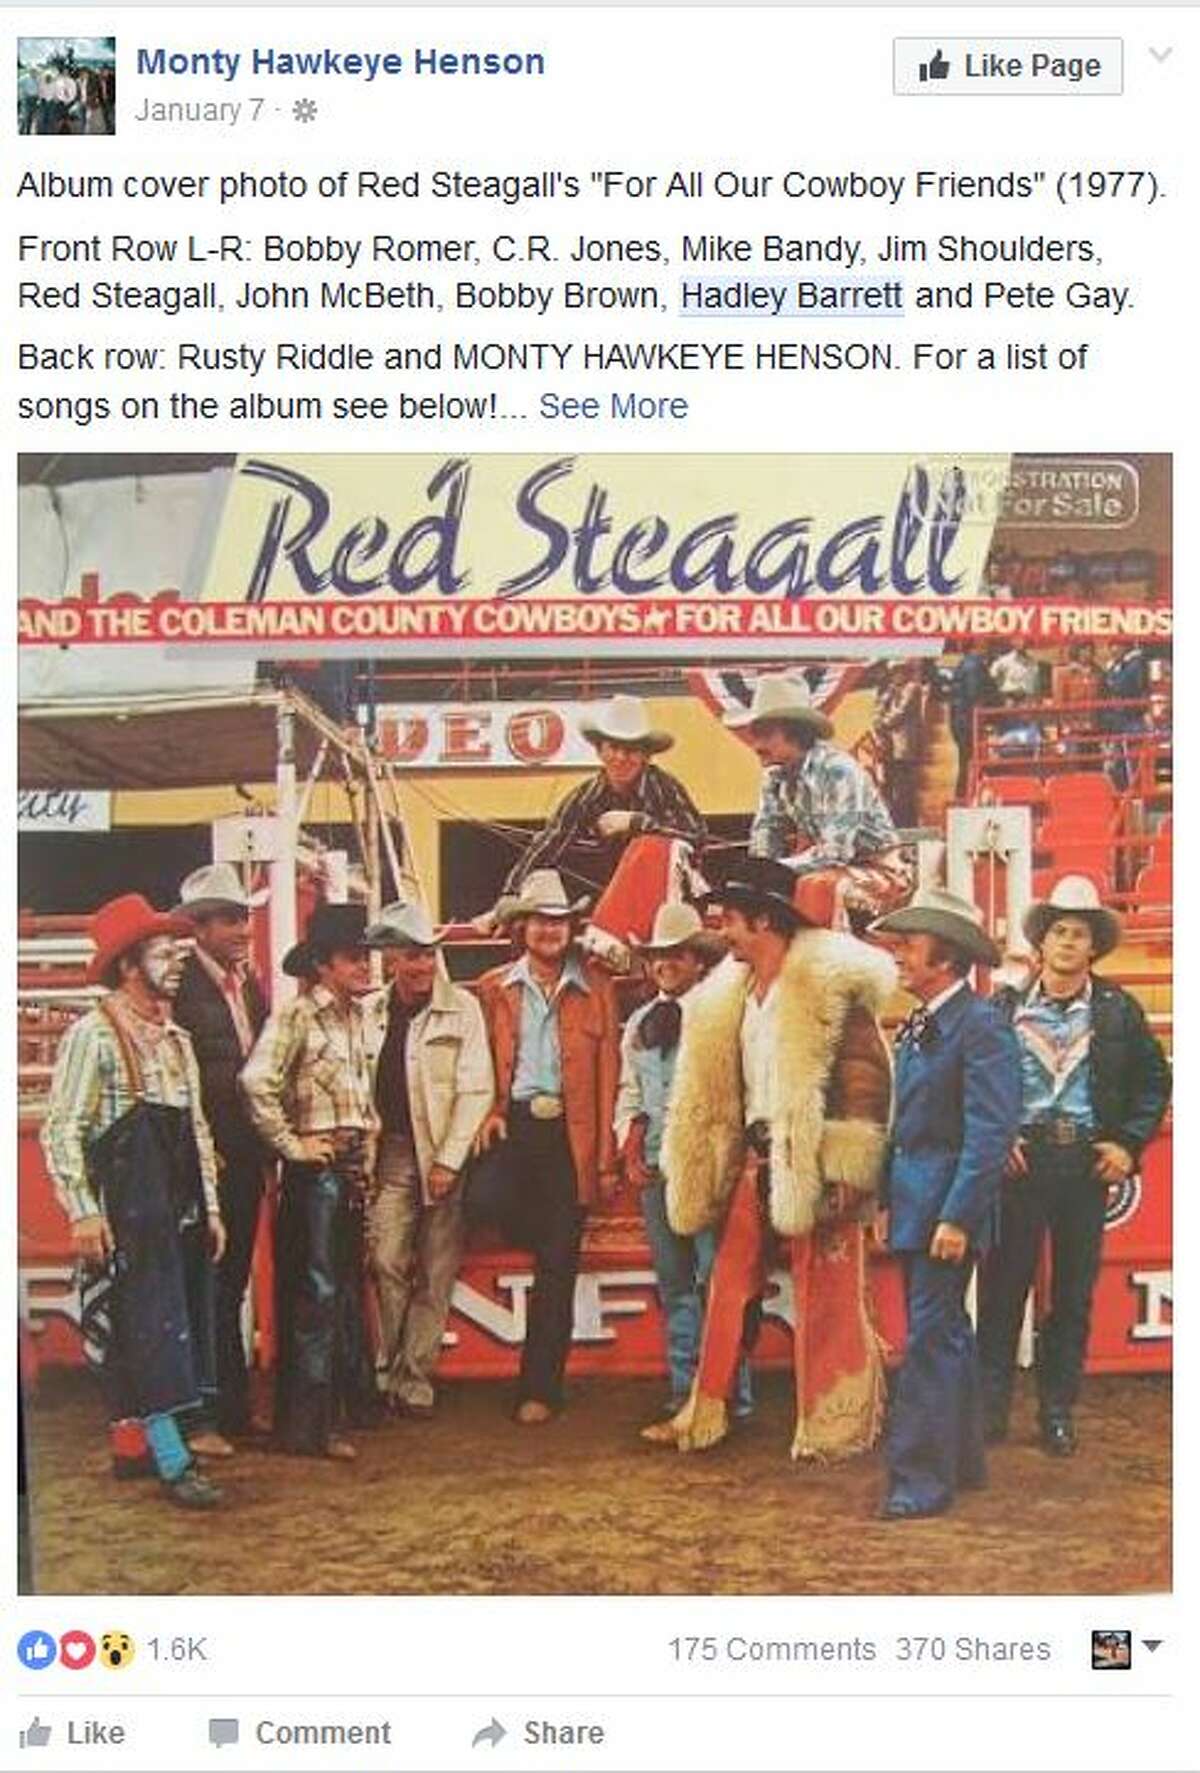 Album cover photo of Red Steagall's "For All Our Cowboy Friends" (1977). Front Row L-R: Bobby Romer, C.R. Jones, Mike Bandy, Jim Shoulders, Red Steagall, John McBeth, Bobby Brown, Hadley Barrett and Pete Gay. Back row: Rusty Riddle and MONTY HAWKEYE HENSON. For a list of songs on the album see below!